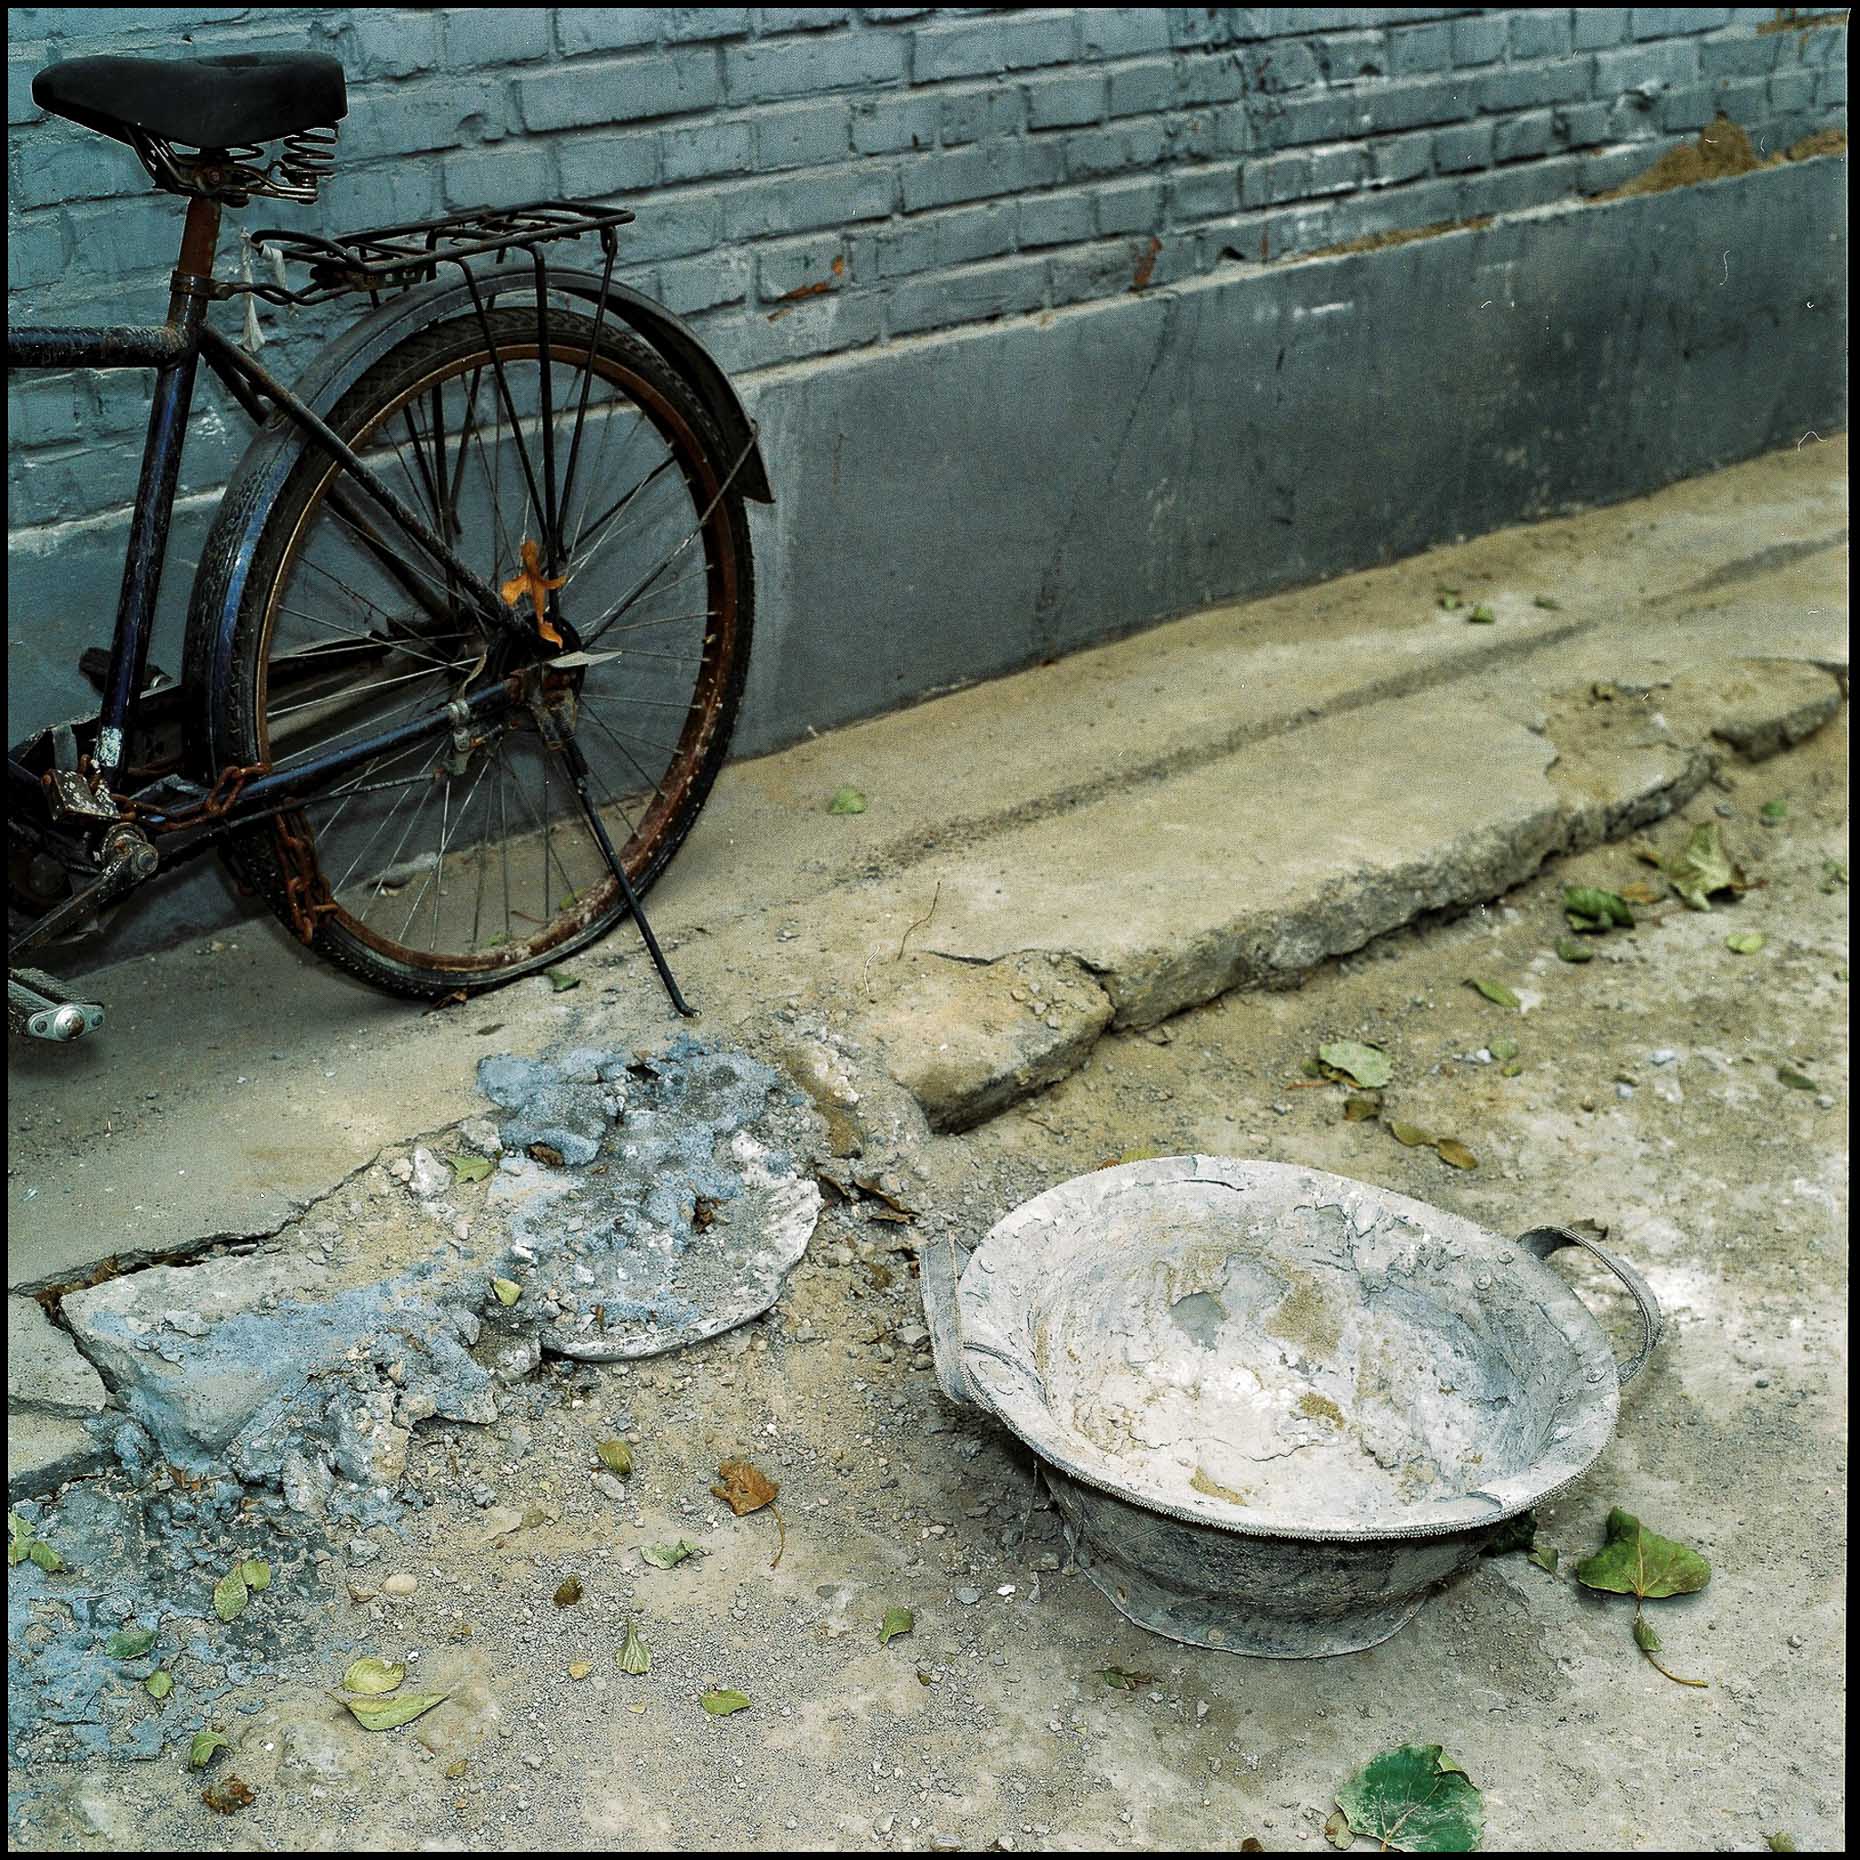 A bicycle, bowl, road and pavement - all in disrepair in the narrow alleys of Beijing. 